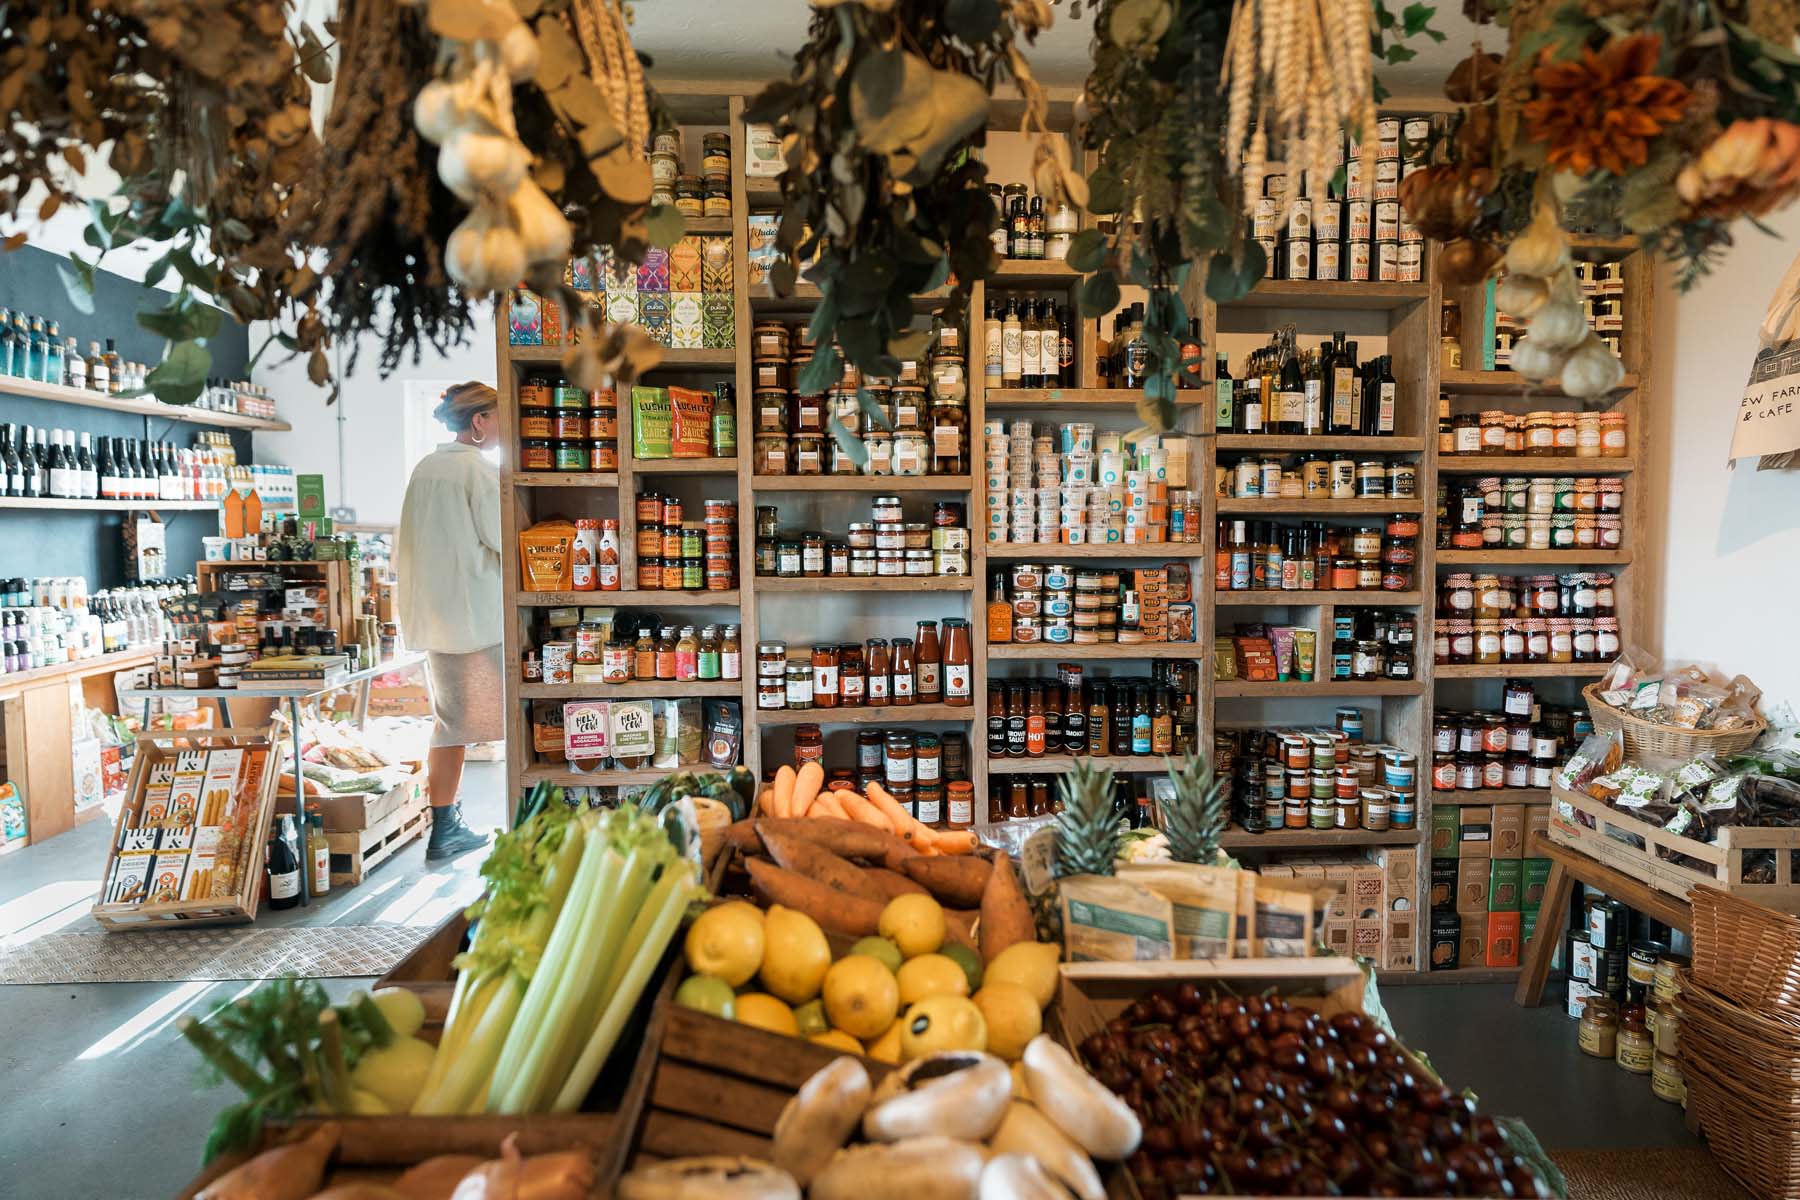 Inside Lemail House's local farmshop